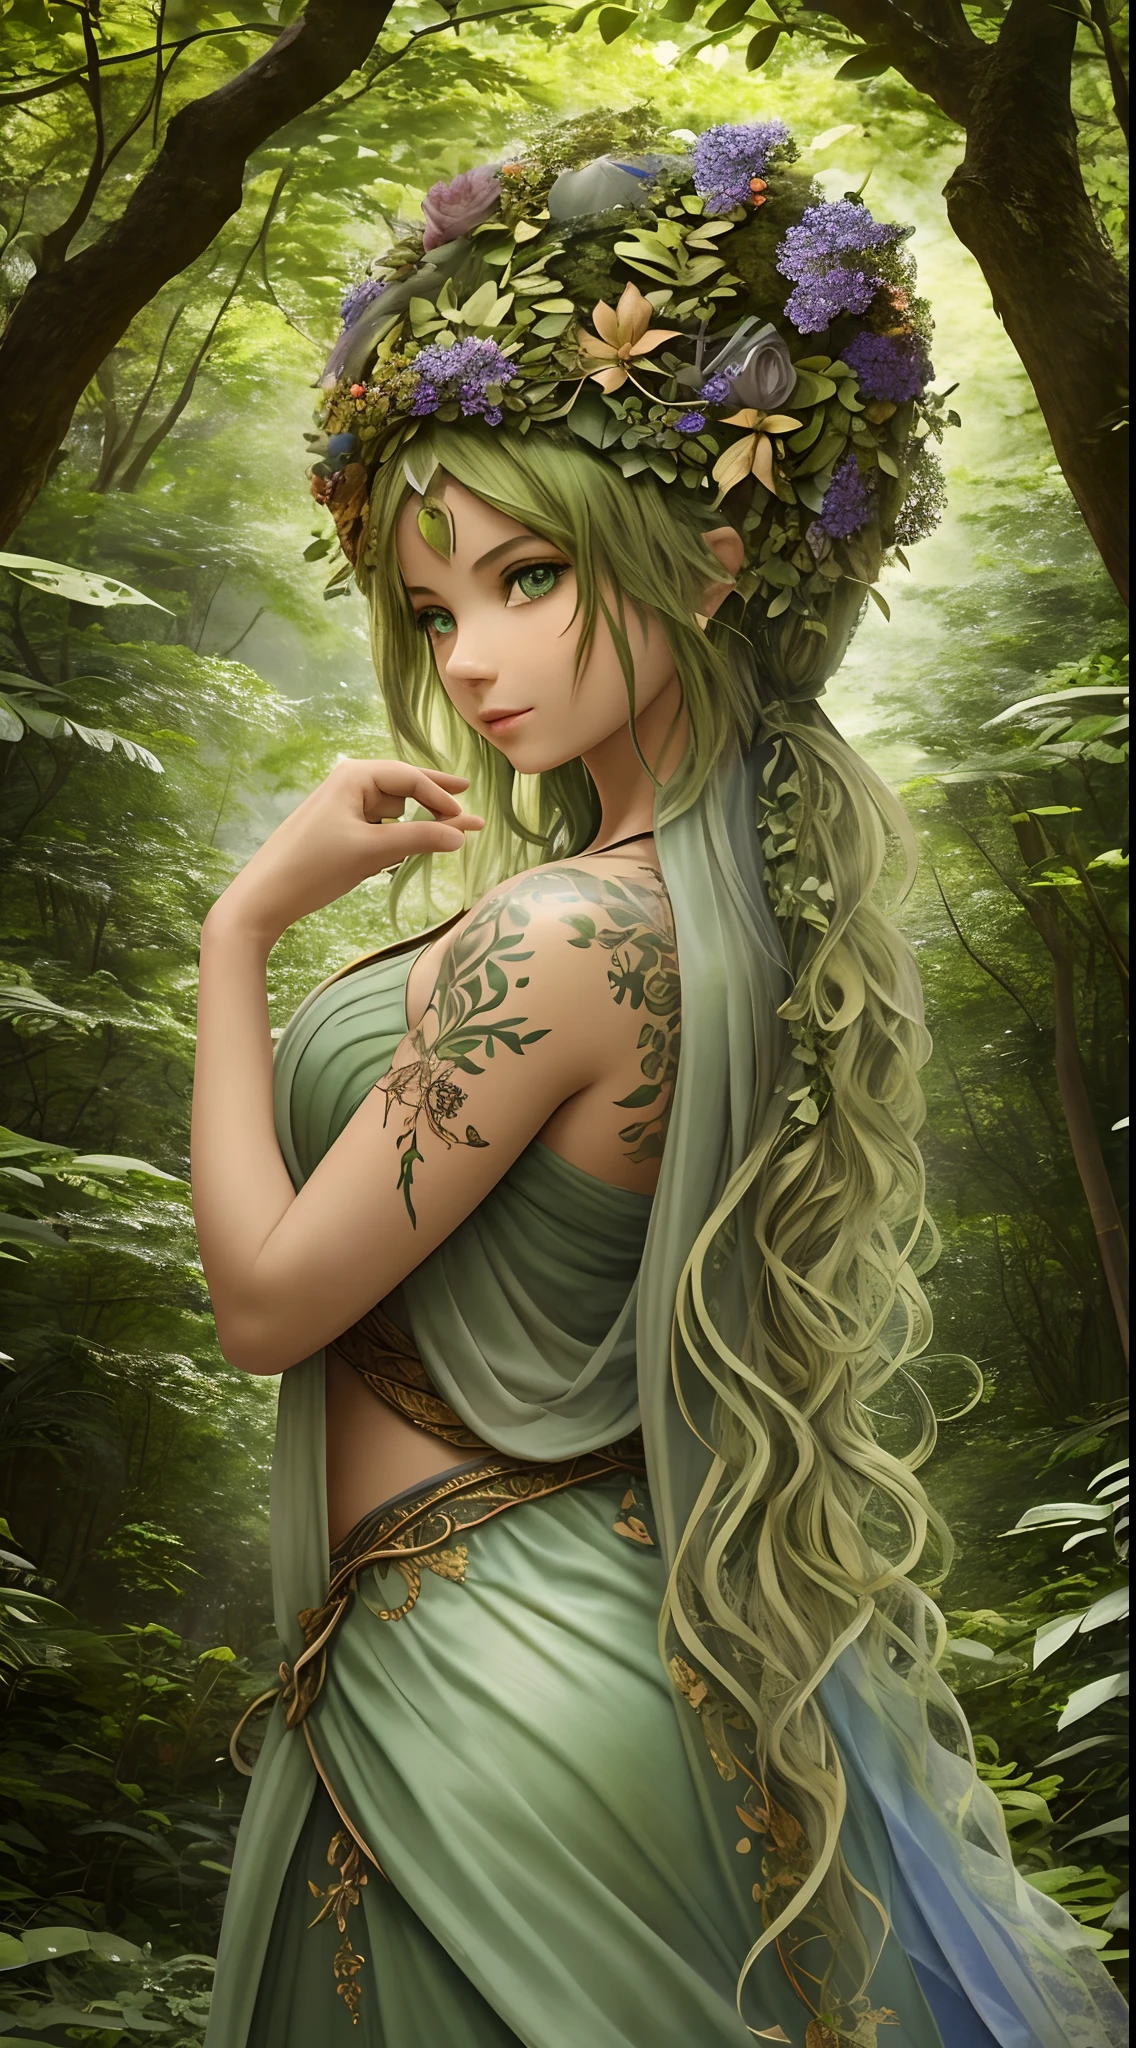 unreal engine:1.4,UHD,The best quality:1.4, photorealistic:1.4, skin texture:1.4, Masterpiece:1.8,Graphic image of a beautiful dryad girl, Flowers are woven into beautiful hair, expressive eyes, Poison ivy leaf tattoos on his face, Drawings of poison ivy leaves and flowers all over the body., a full body figure, Light green skin in a girl, Model pose, Dense forest thicket in the background, High detail, hyperrealism, high quality, clear focus, SLR camera, .cgi.